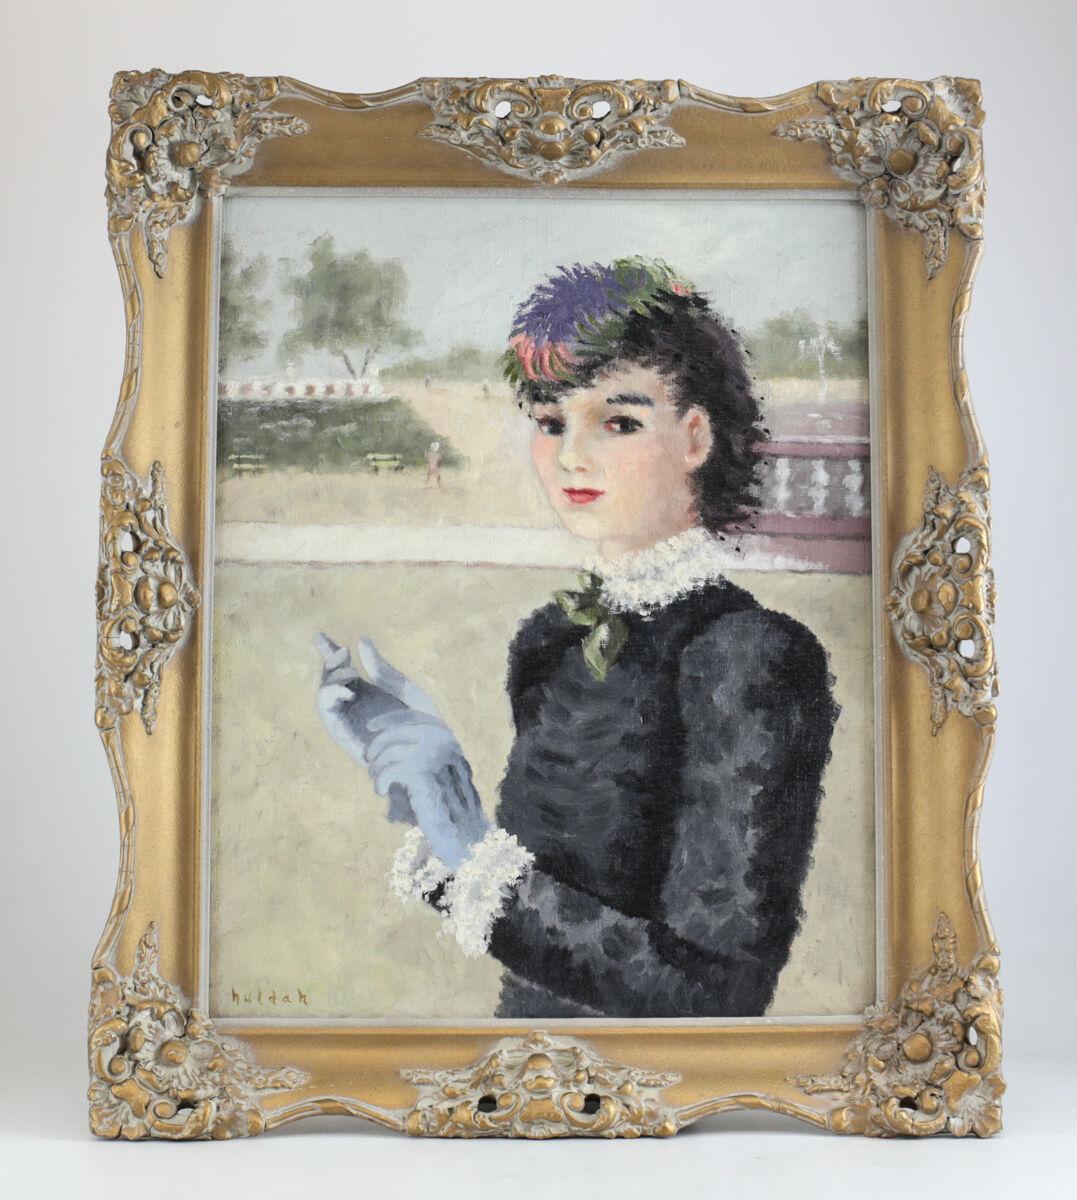 Set of Cherry Jeffe Huldah oil on canvas painting maiden

Portrait painting of an early 20th century costumed woman with a feathered head piece, black and white ruffled dress, green neck tie, and light blue gloves. Gilt wood frame with foliate